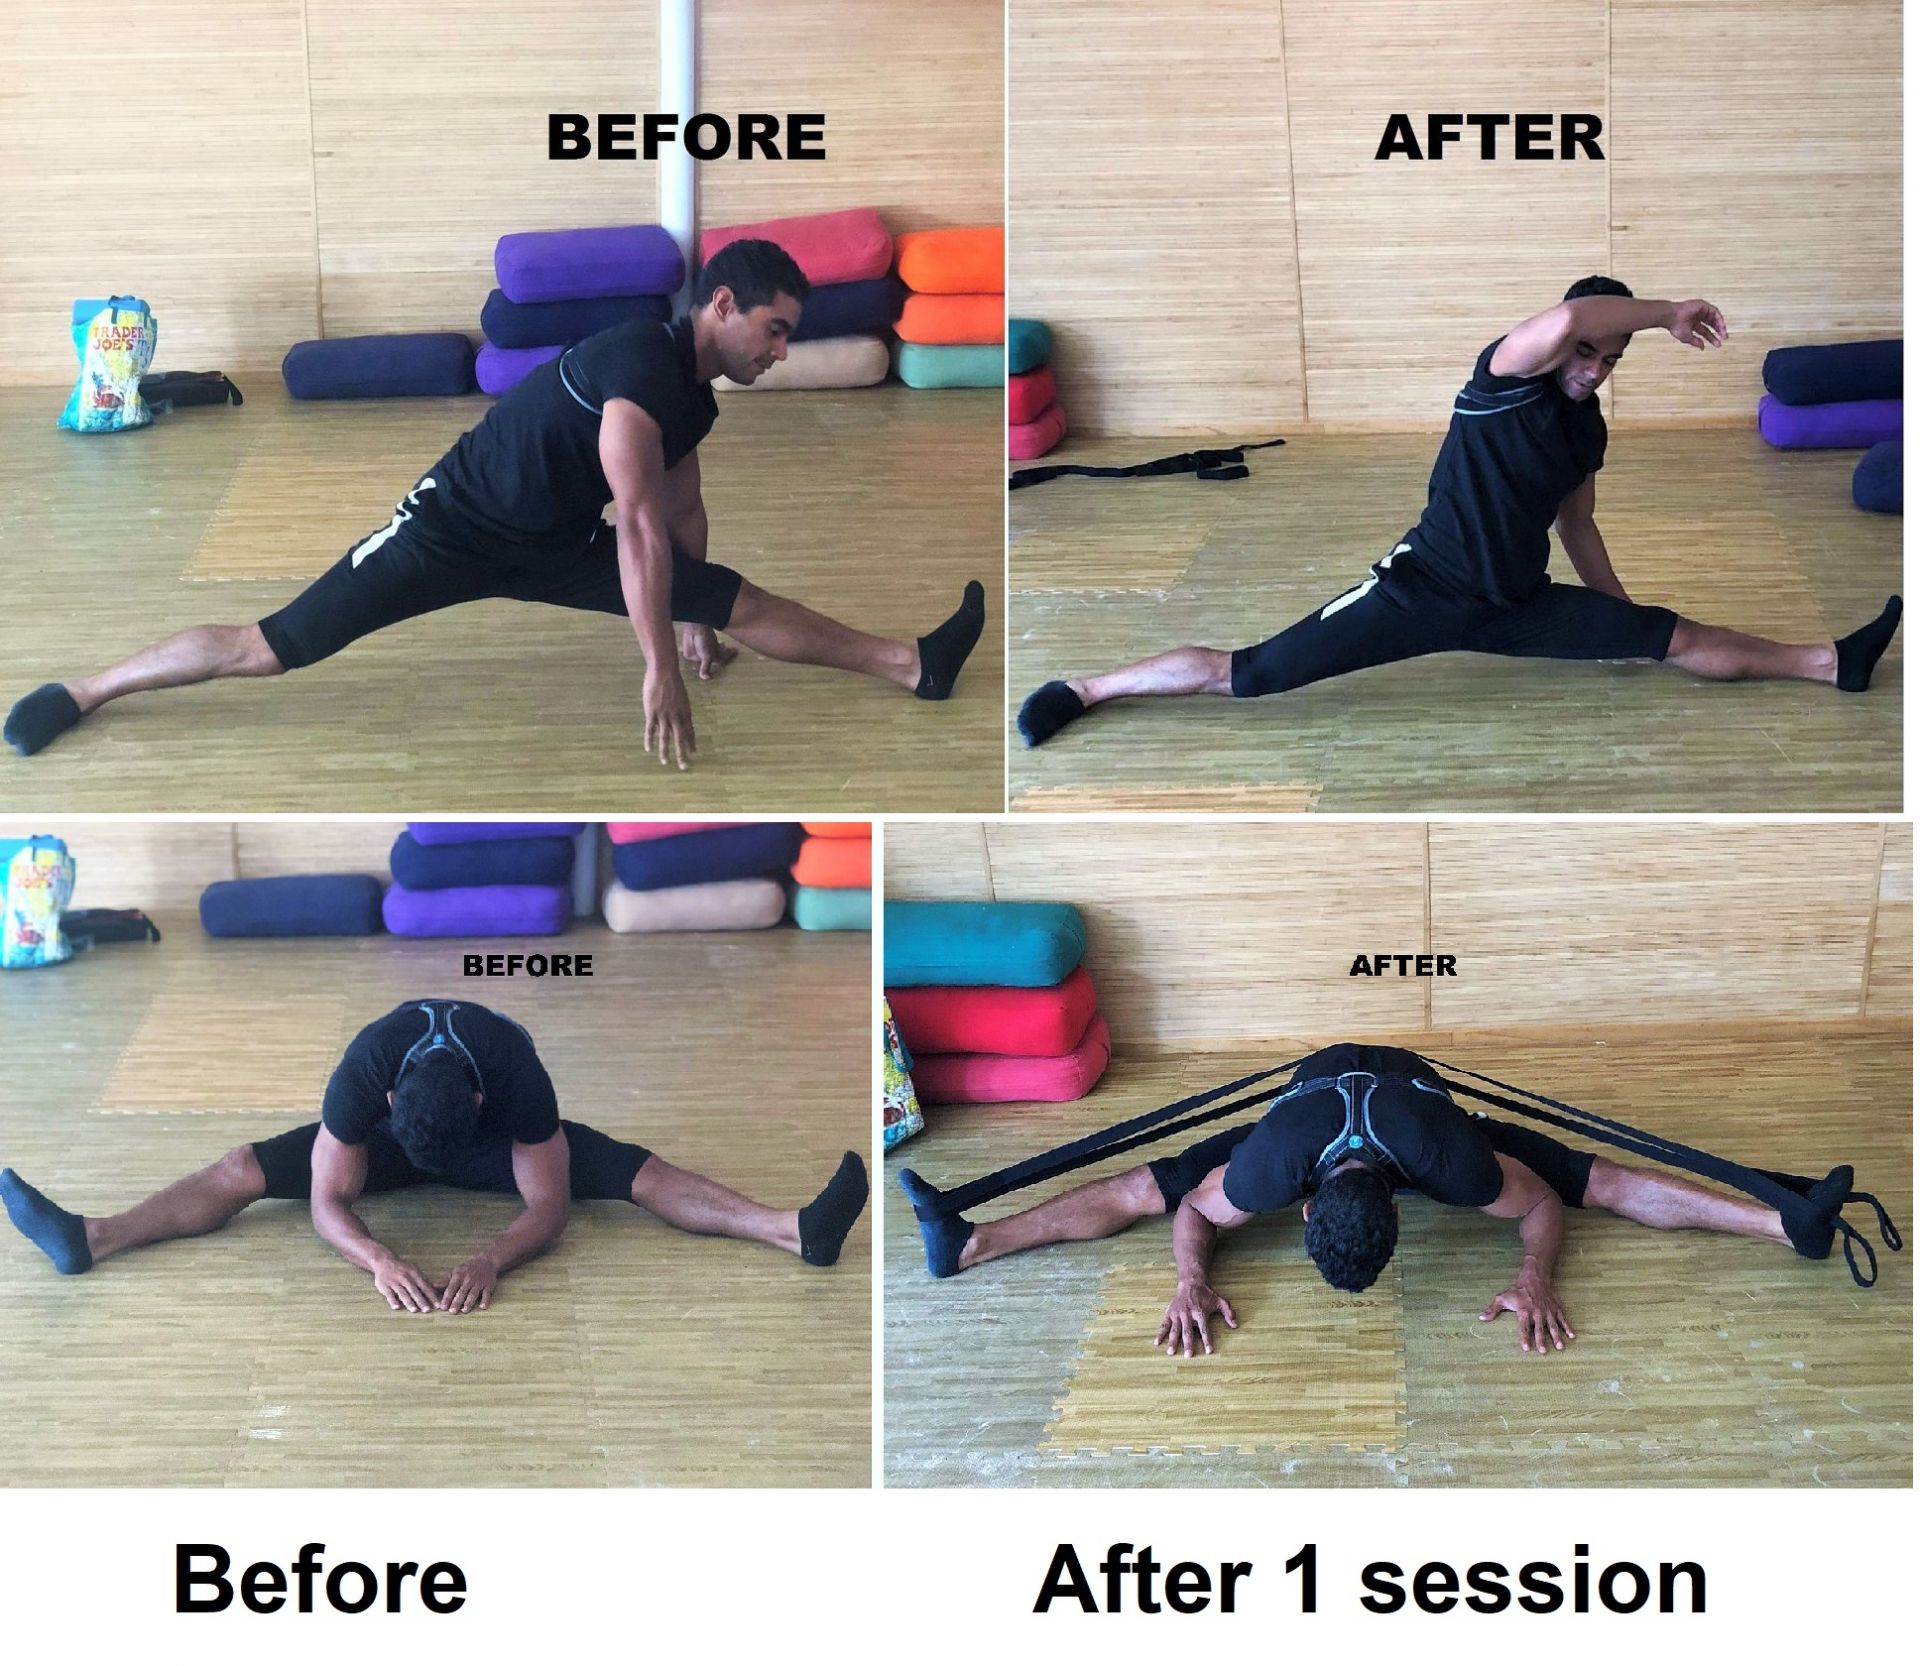 Actor Nick Sagar dramatically improves splits after training with flexibility expert 